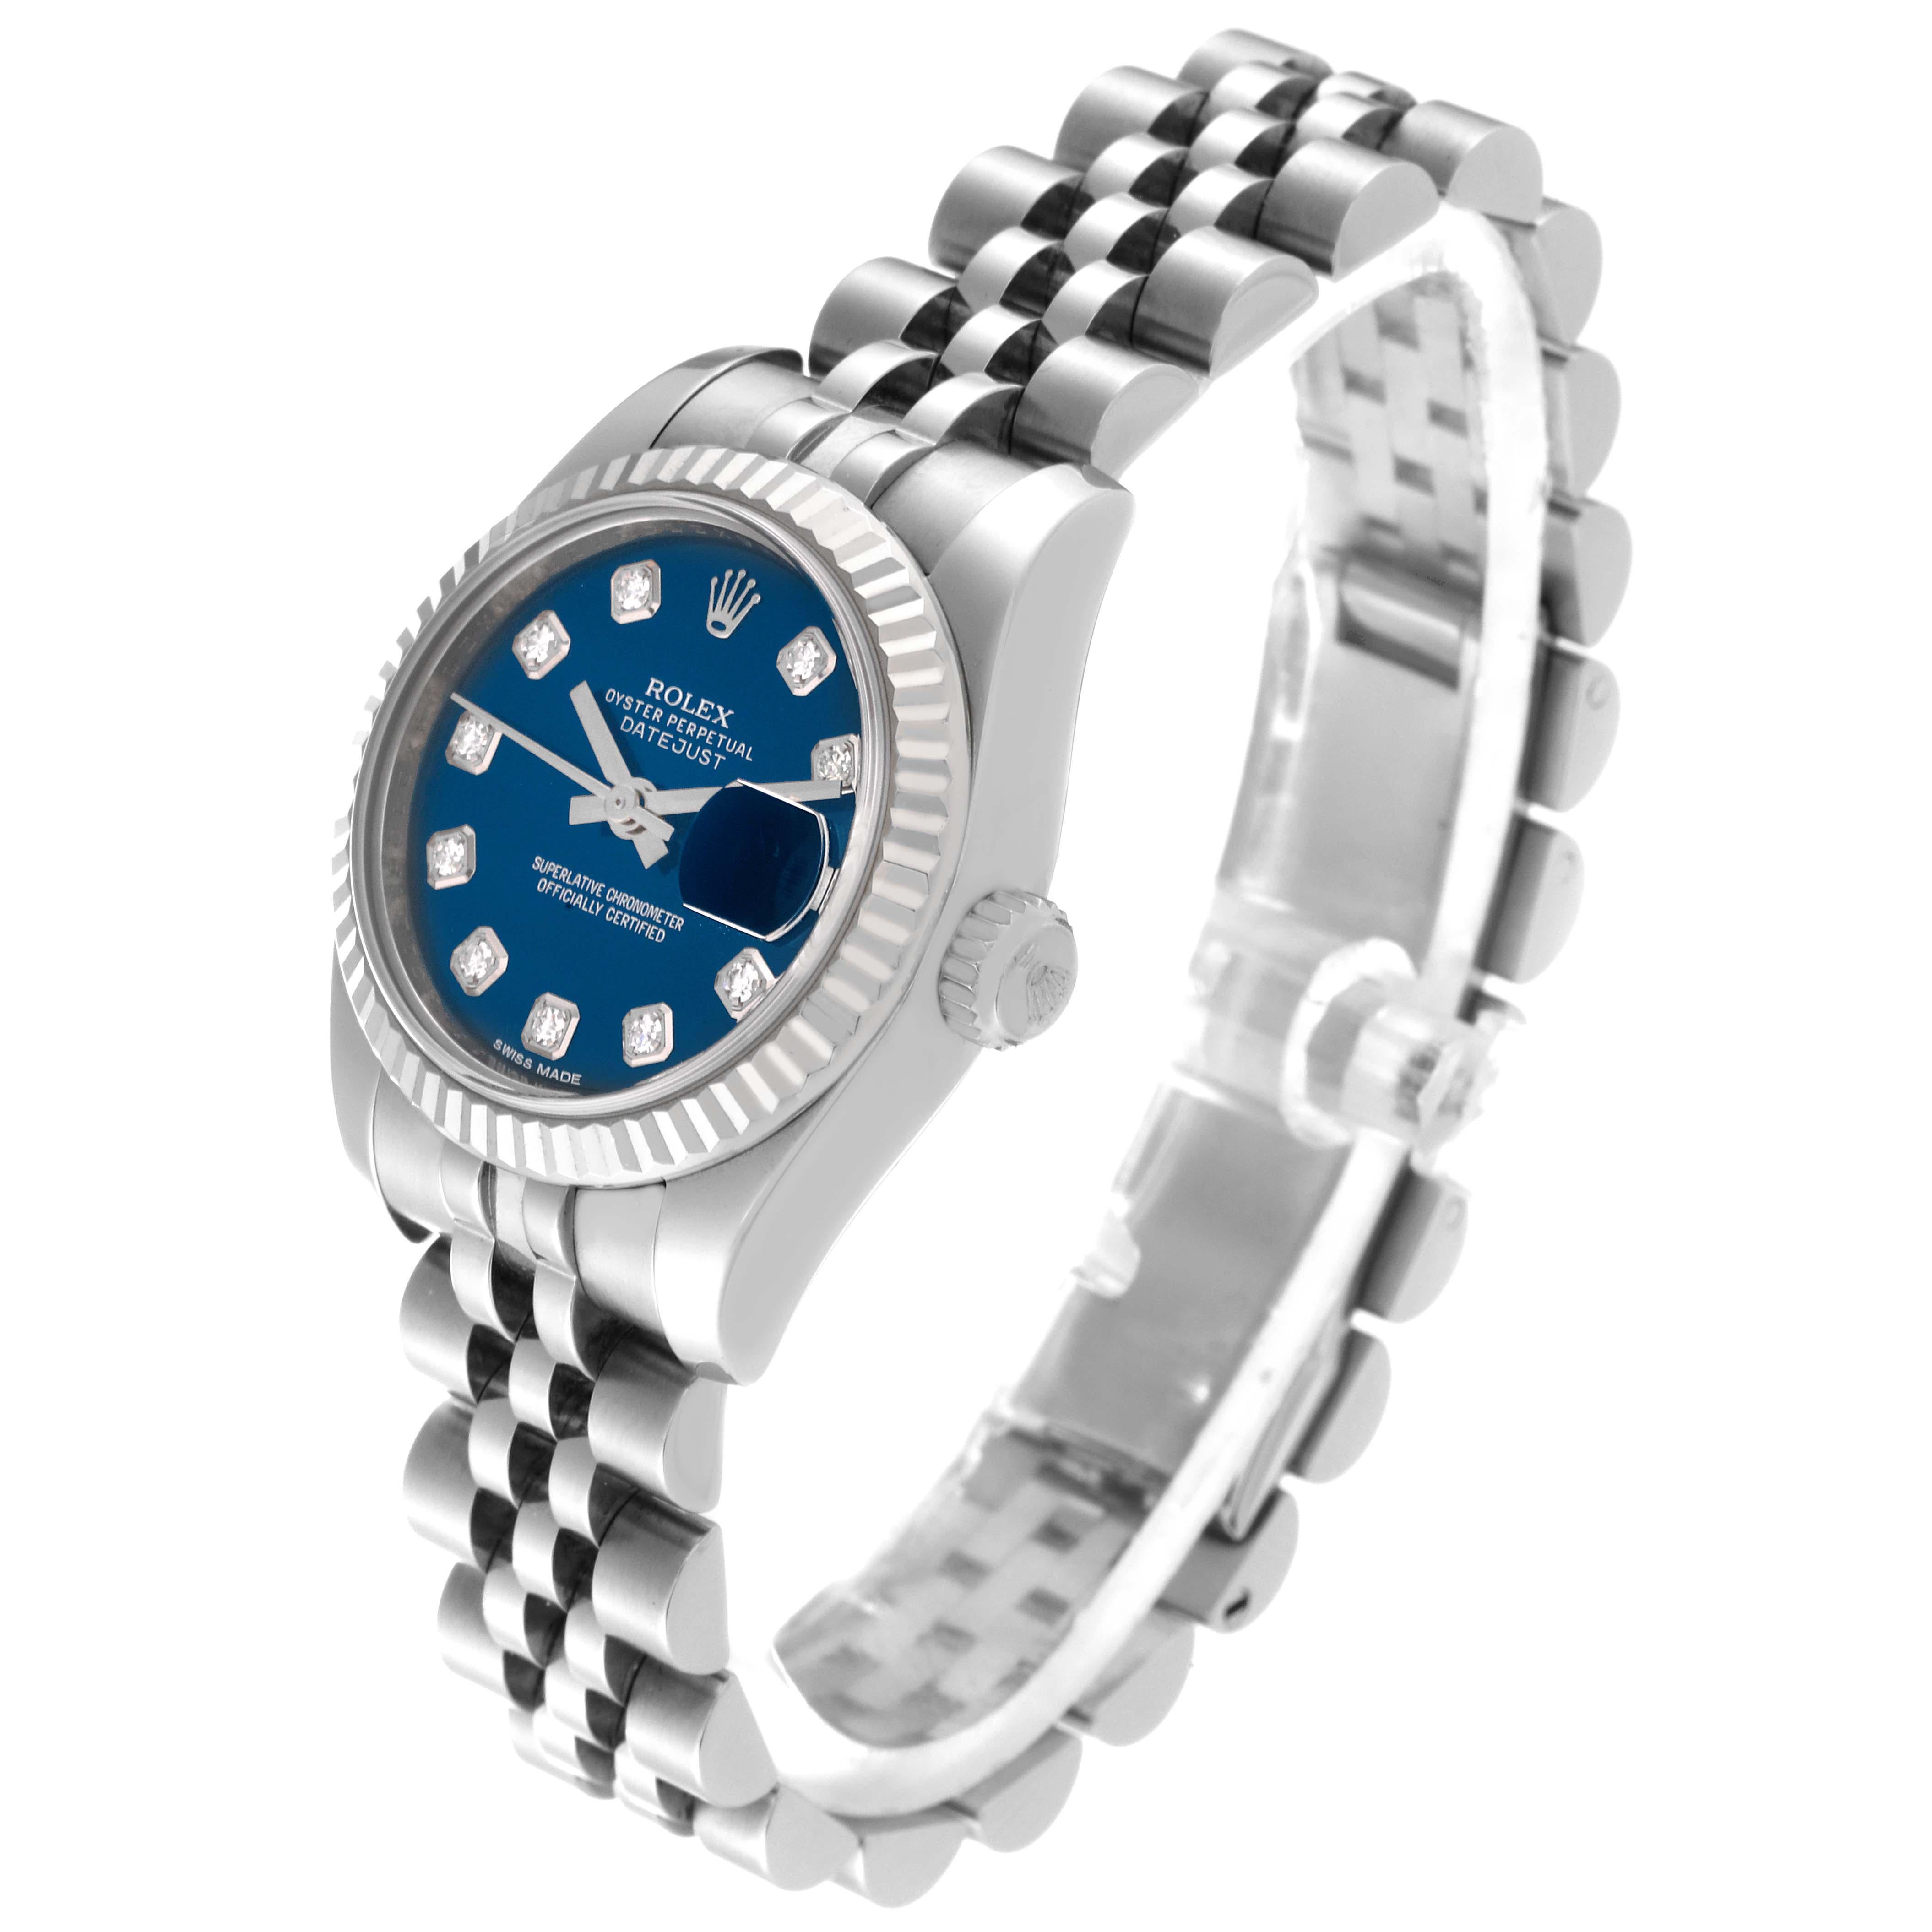 Rolex Datejust Steel White Gold Blue Diamond Dial Ladies Watch 179174 For Sale 2